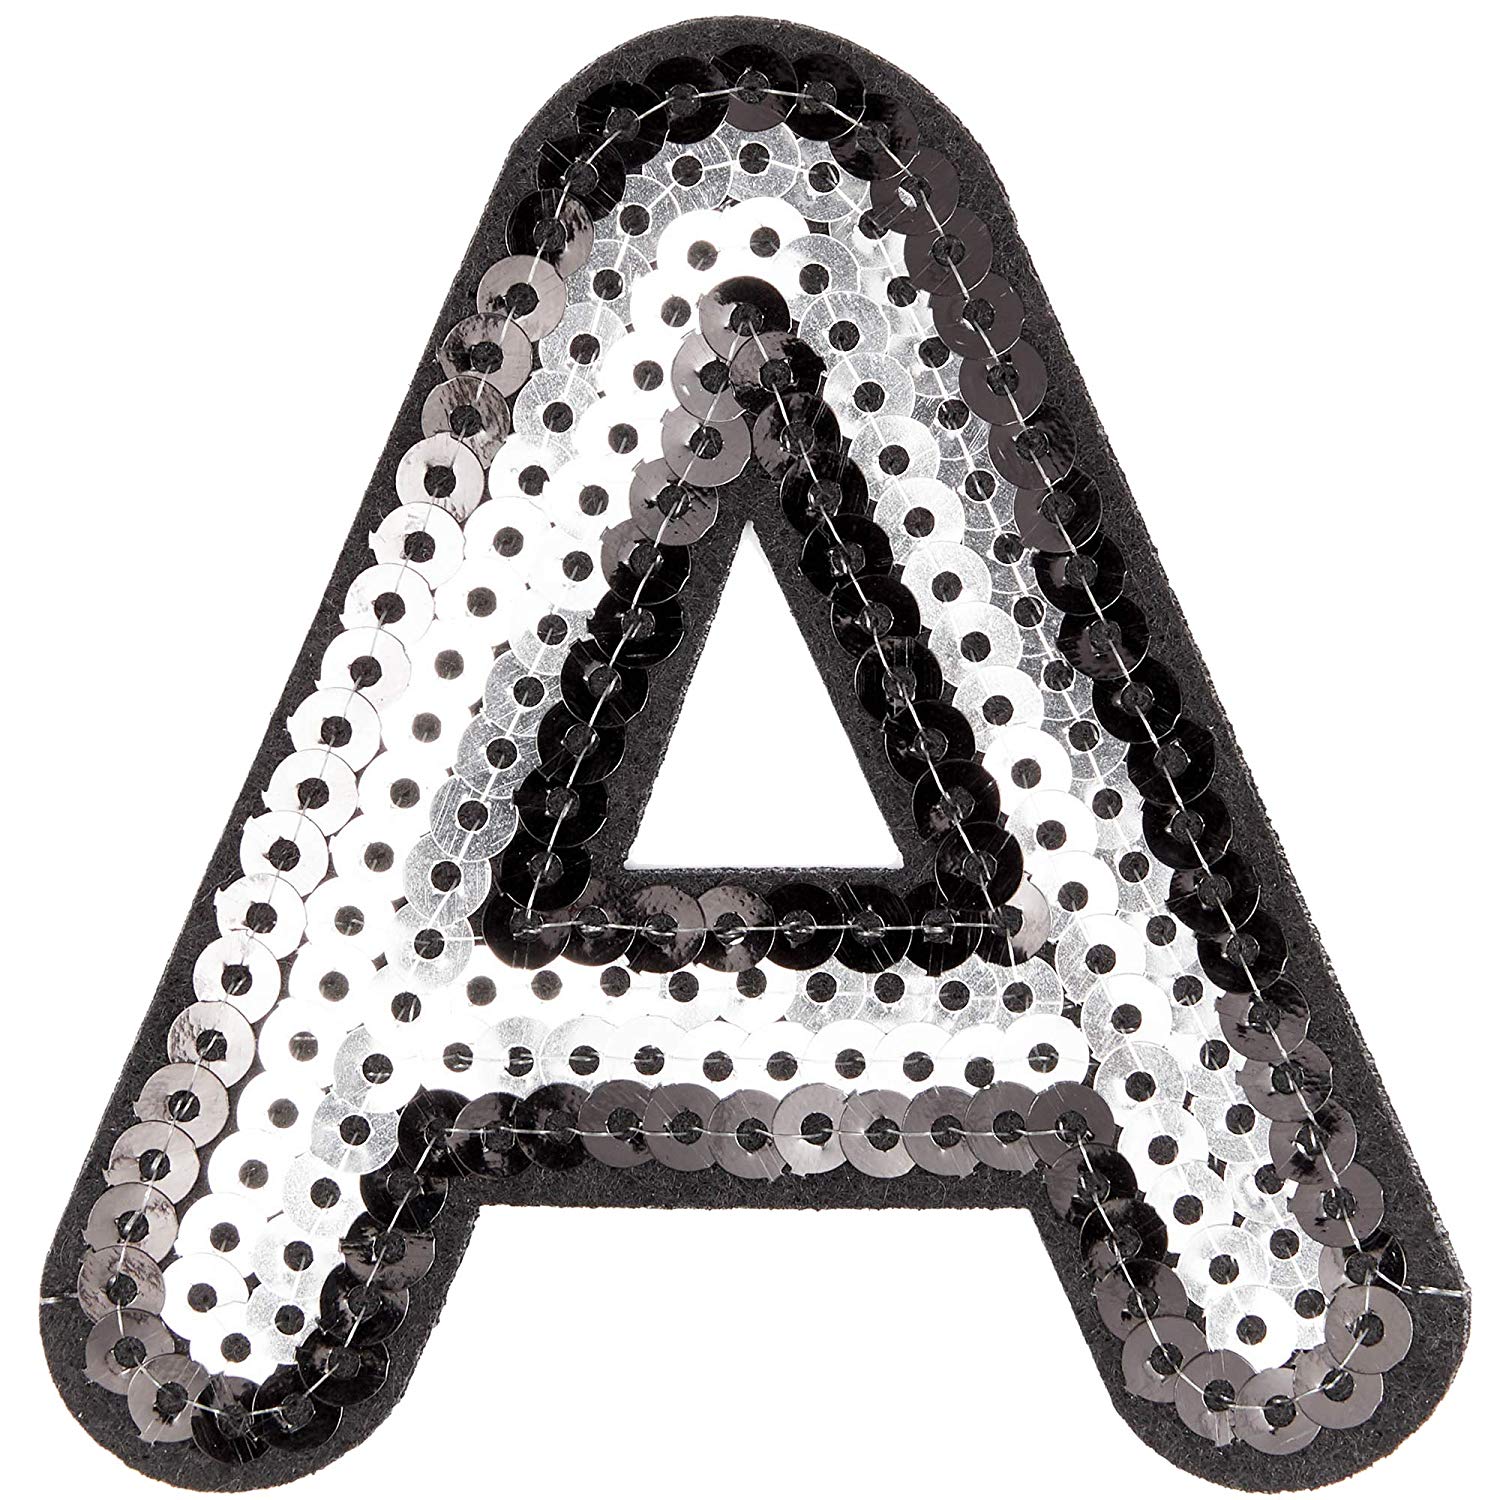 Iron on Letters for Clothing, A-Z Sequin Embroidery Patches for Jackets & Denim (3.7 x 3 in, 27 Pieces)